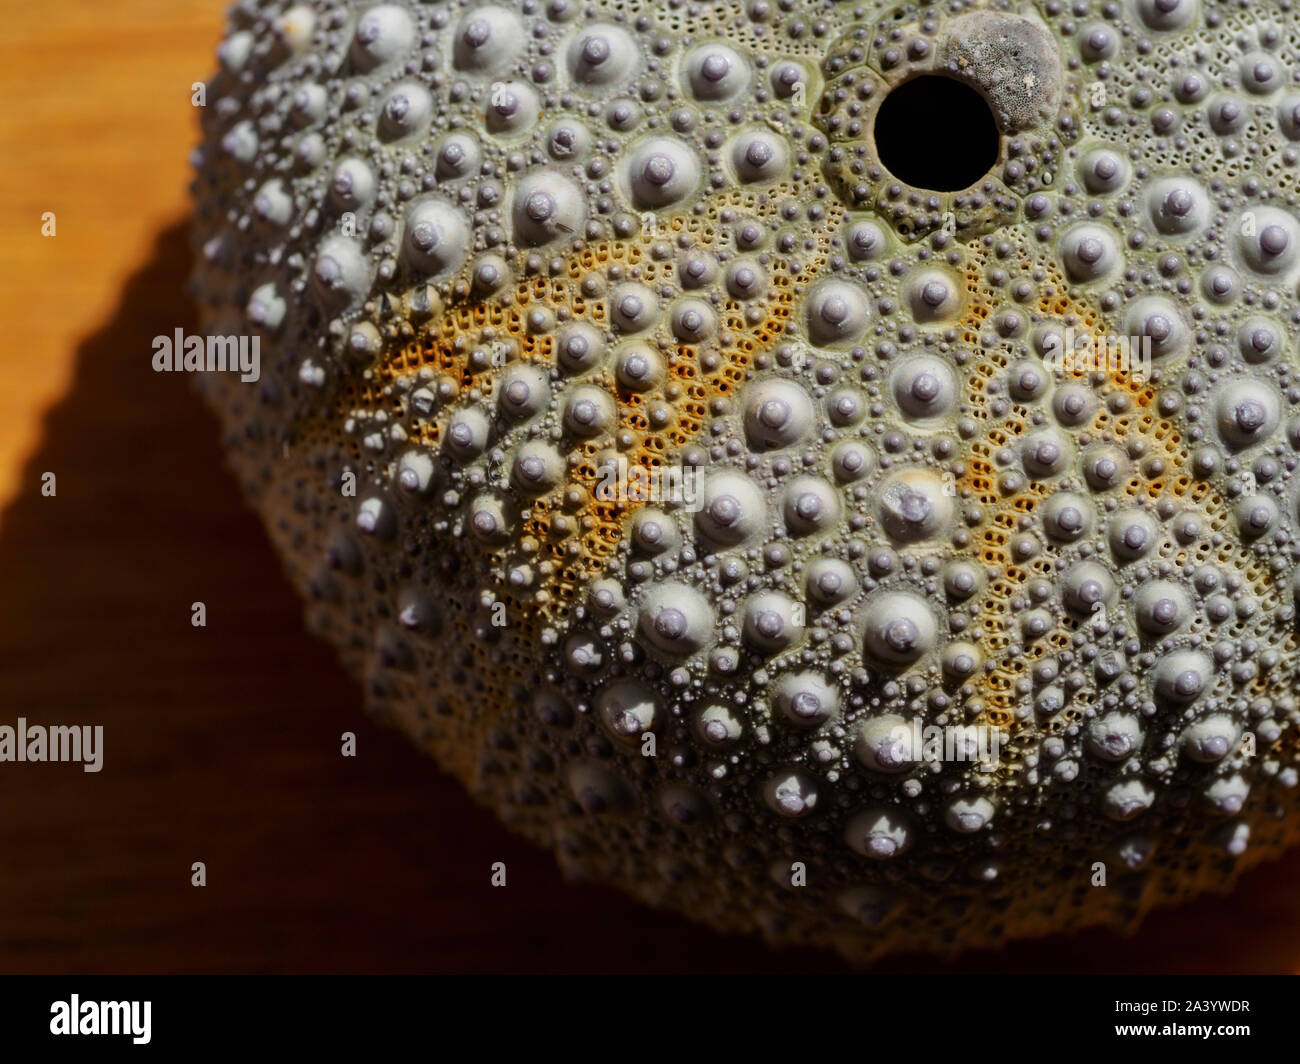 View directly above sea urchin shell Stock Photo